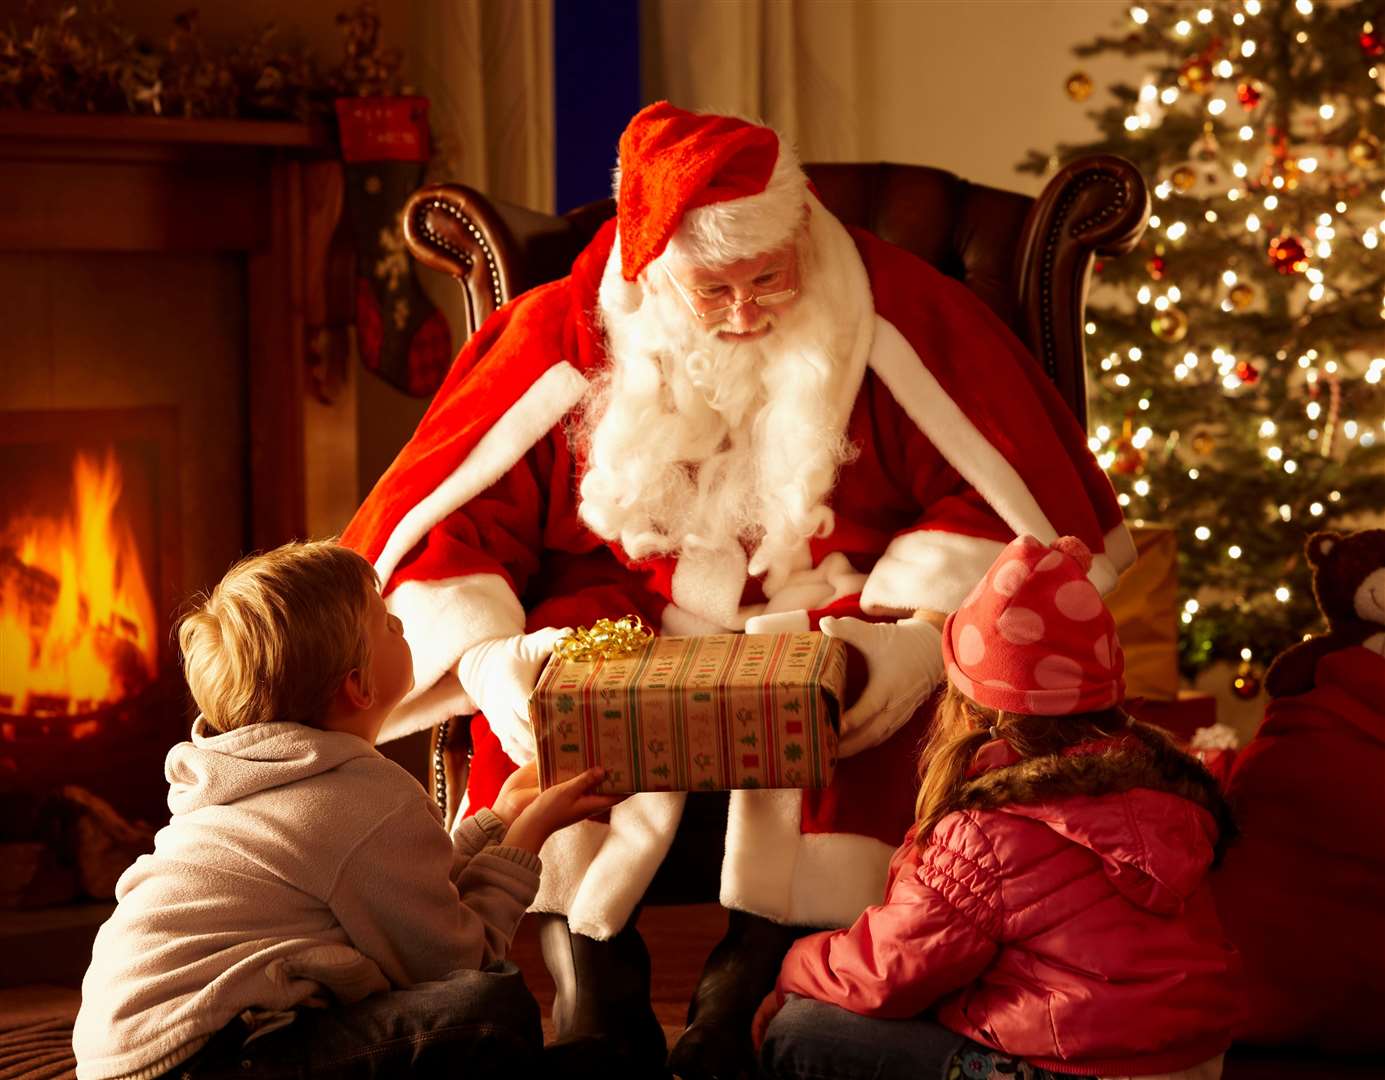 Royal Mail has been behind the delivery of letters to Santa for more than 60 years. Image: iStock.